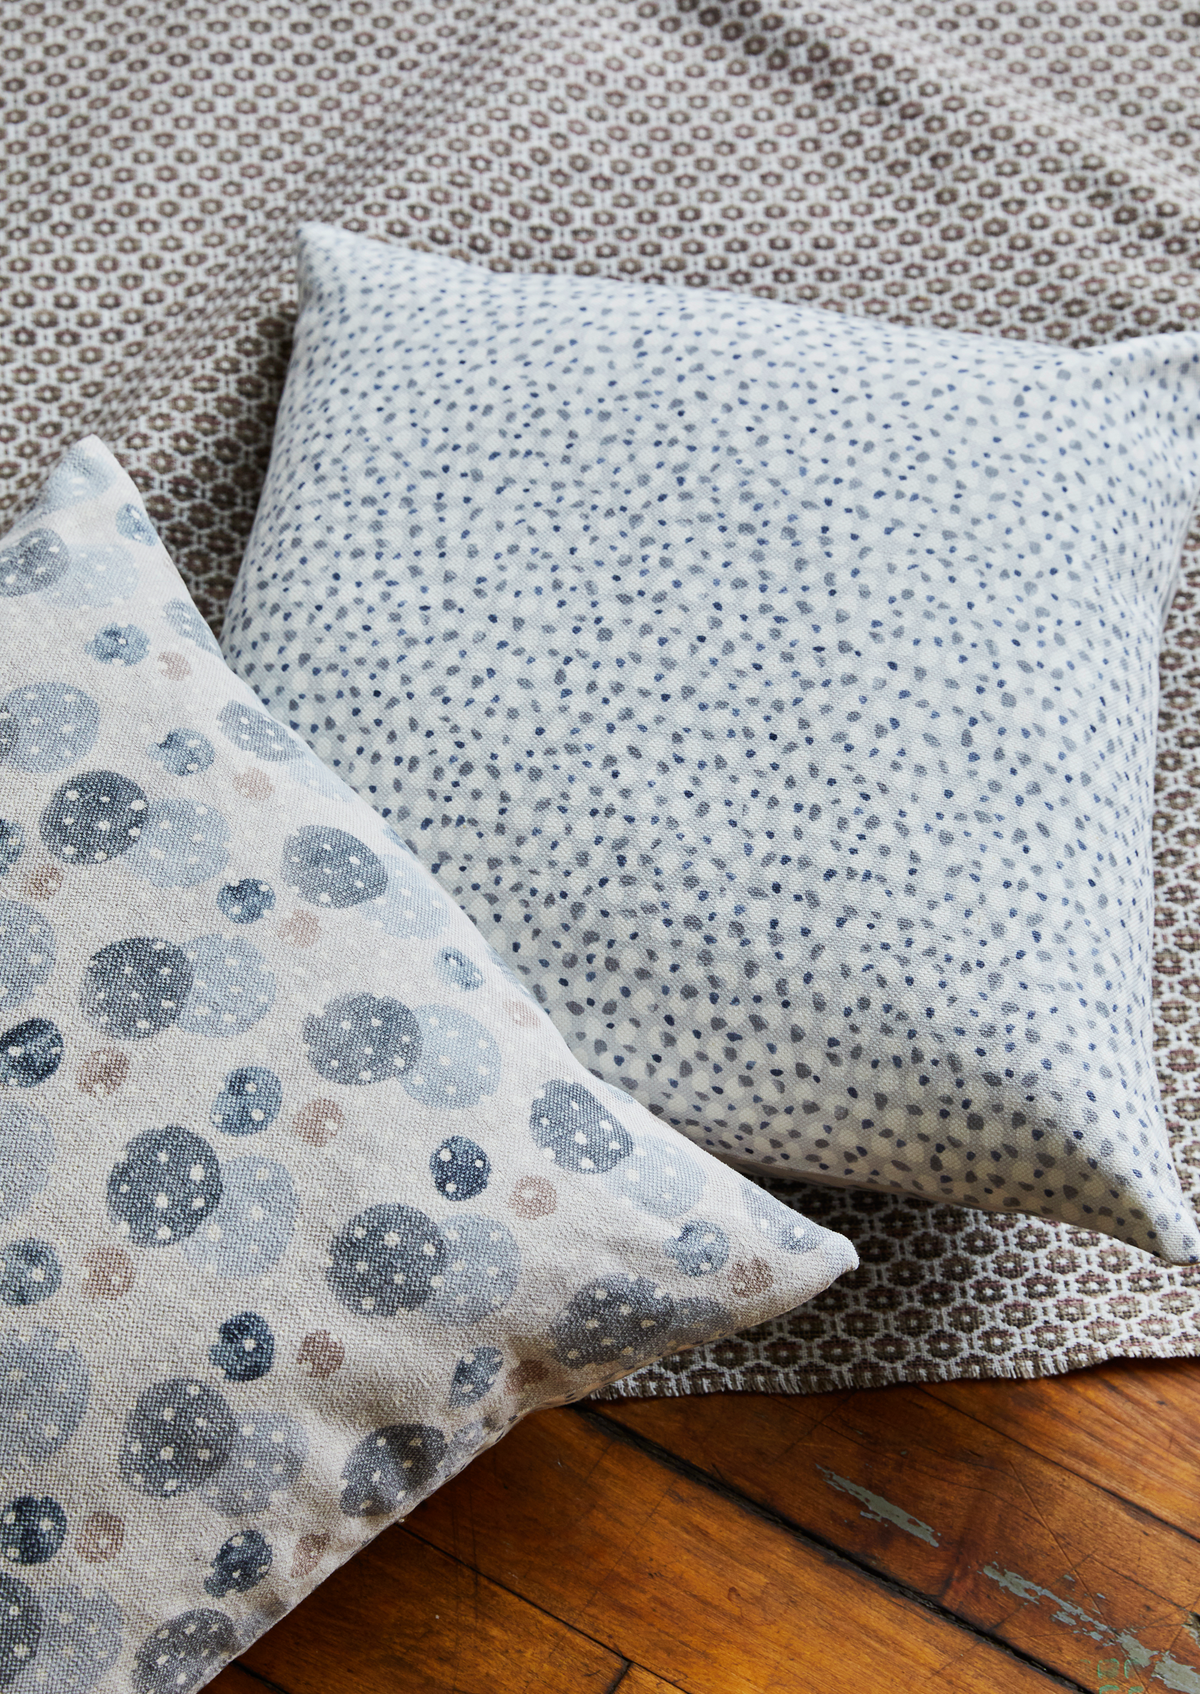 Scattered Dot Fabric in Gray-Blue